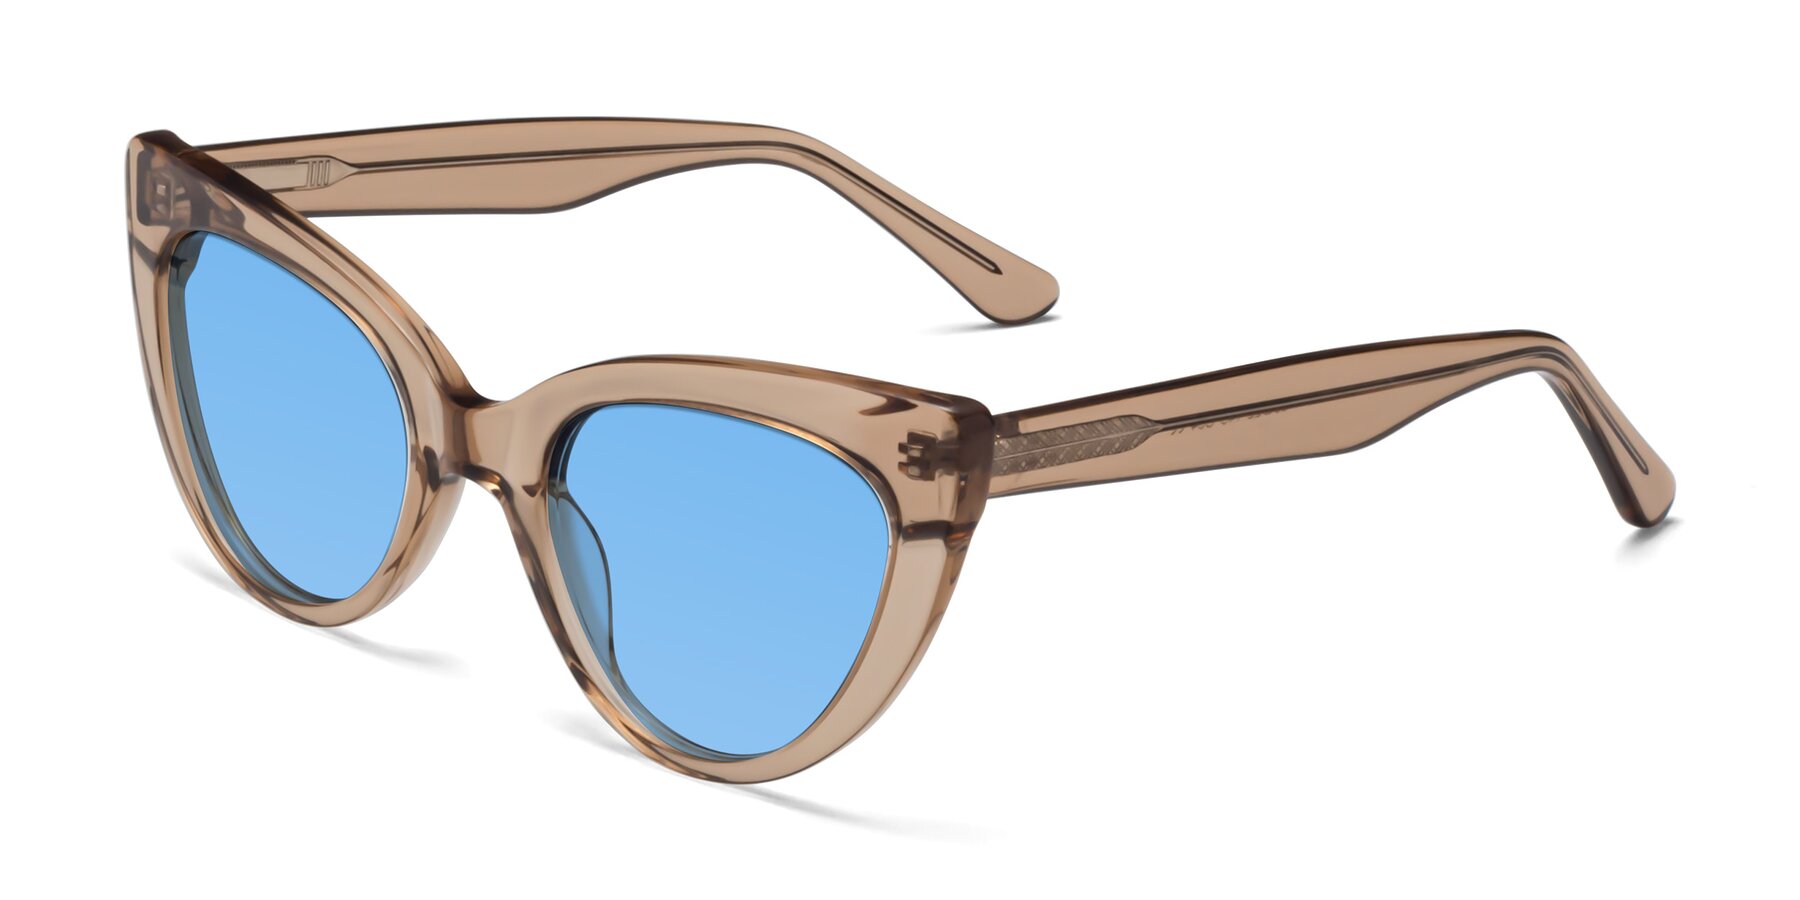 Angle of Tiesi in Caramel with Medium Blue Tinted Lenses